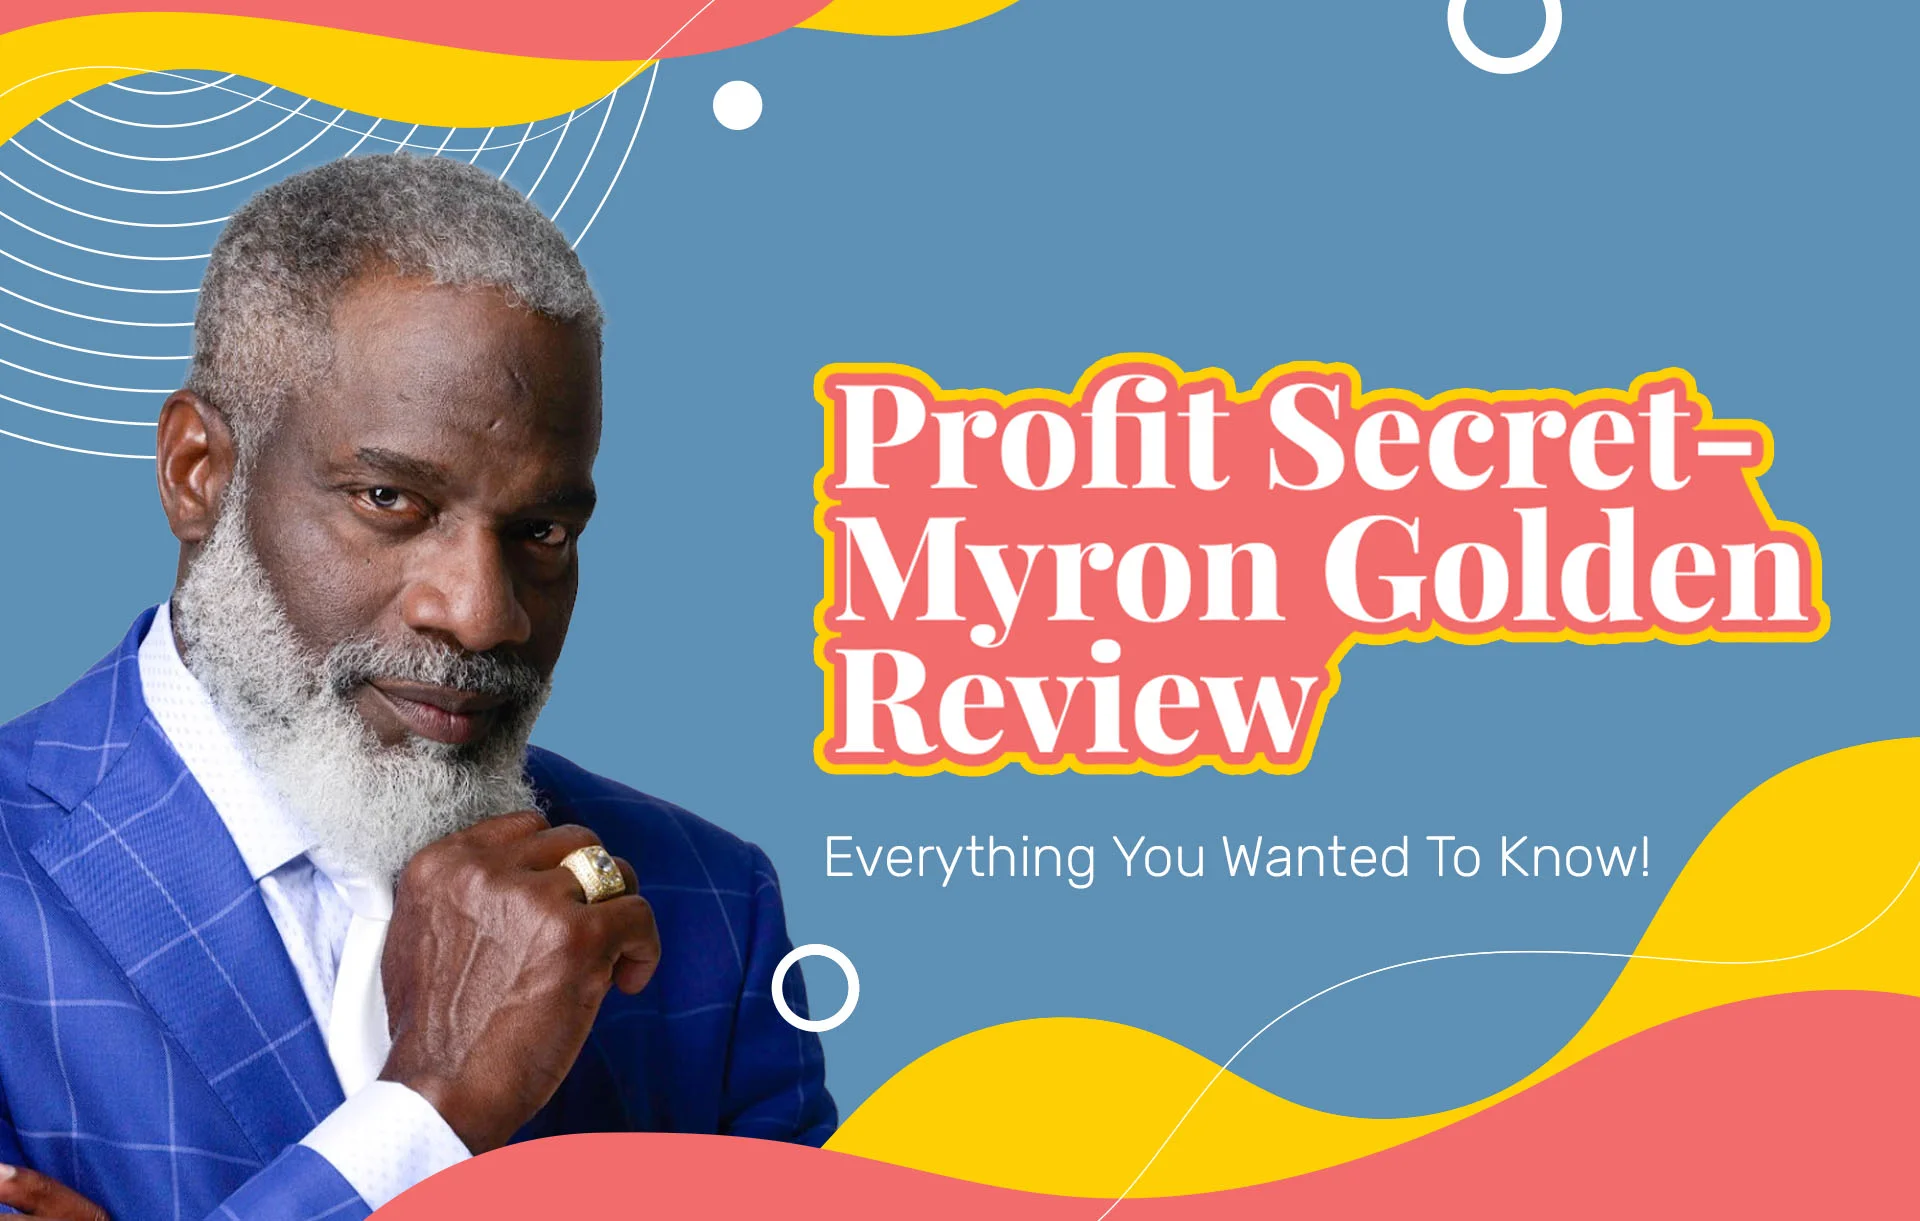 Profit Secret- Myron Golden Reviews: Everything You Wanted To Know!